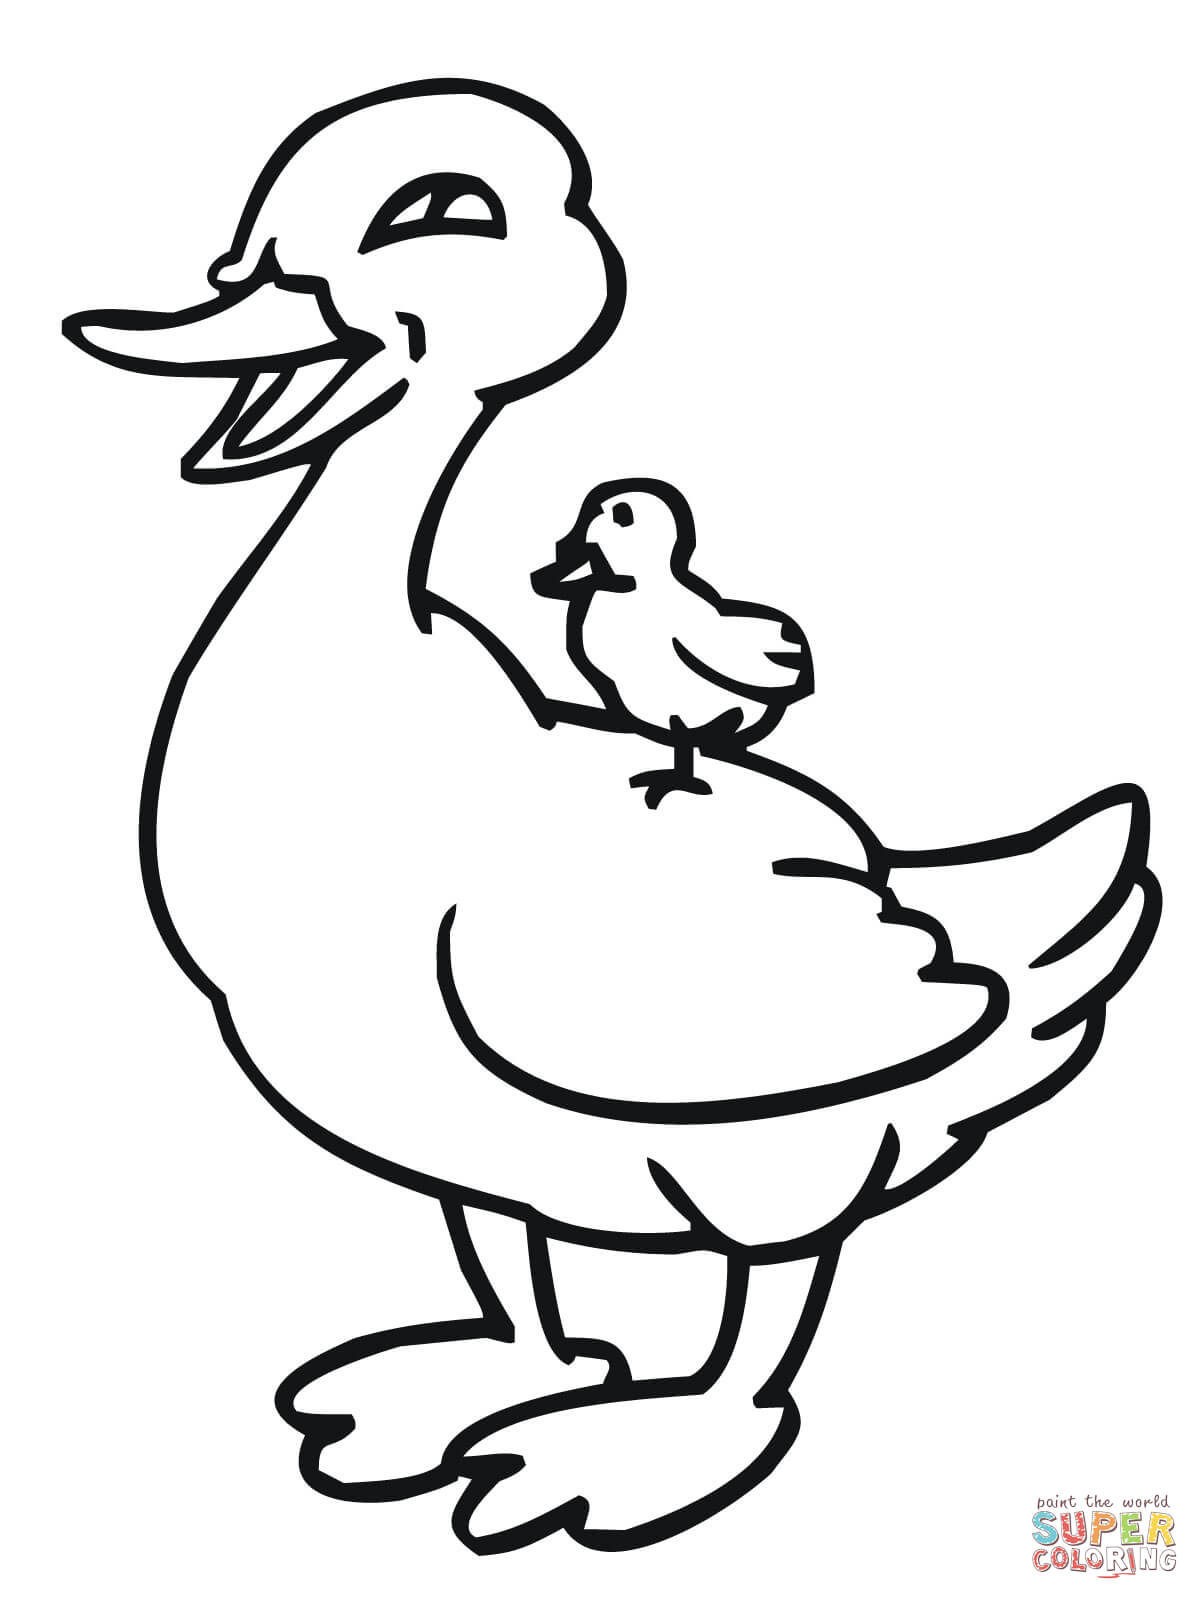 Coloring Page Duck Ducks Coloring Pages Free Coloring Pages